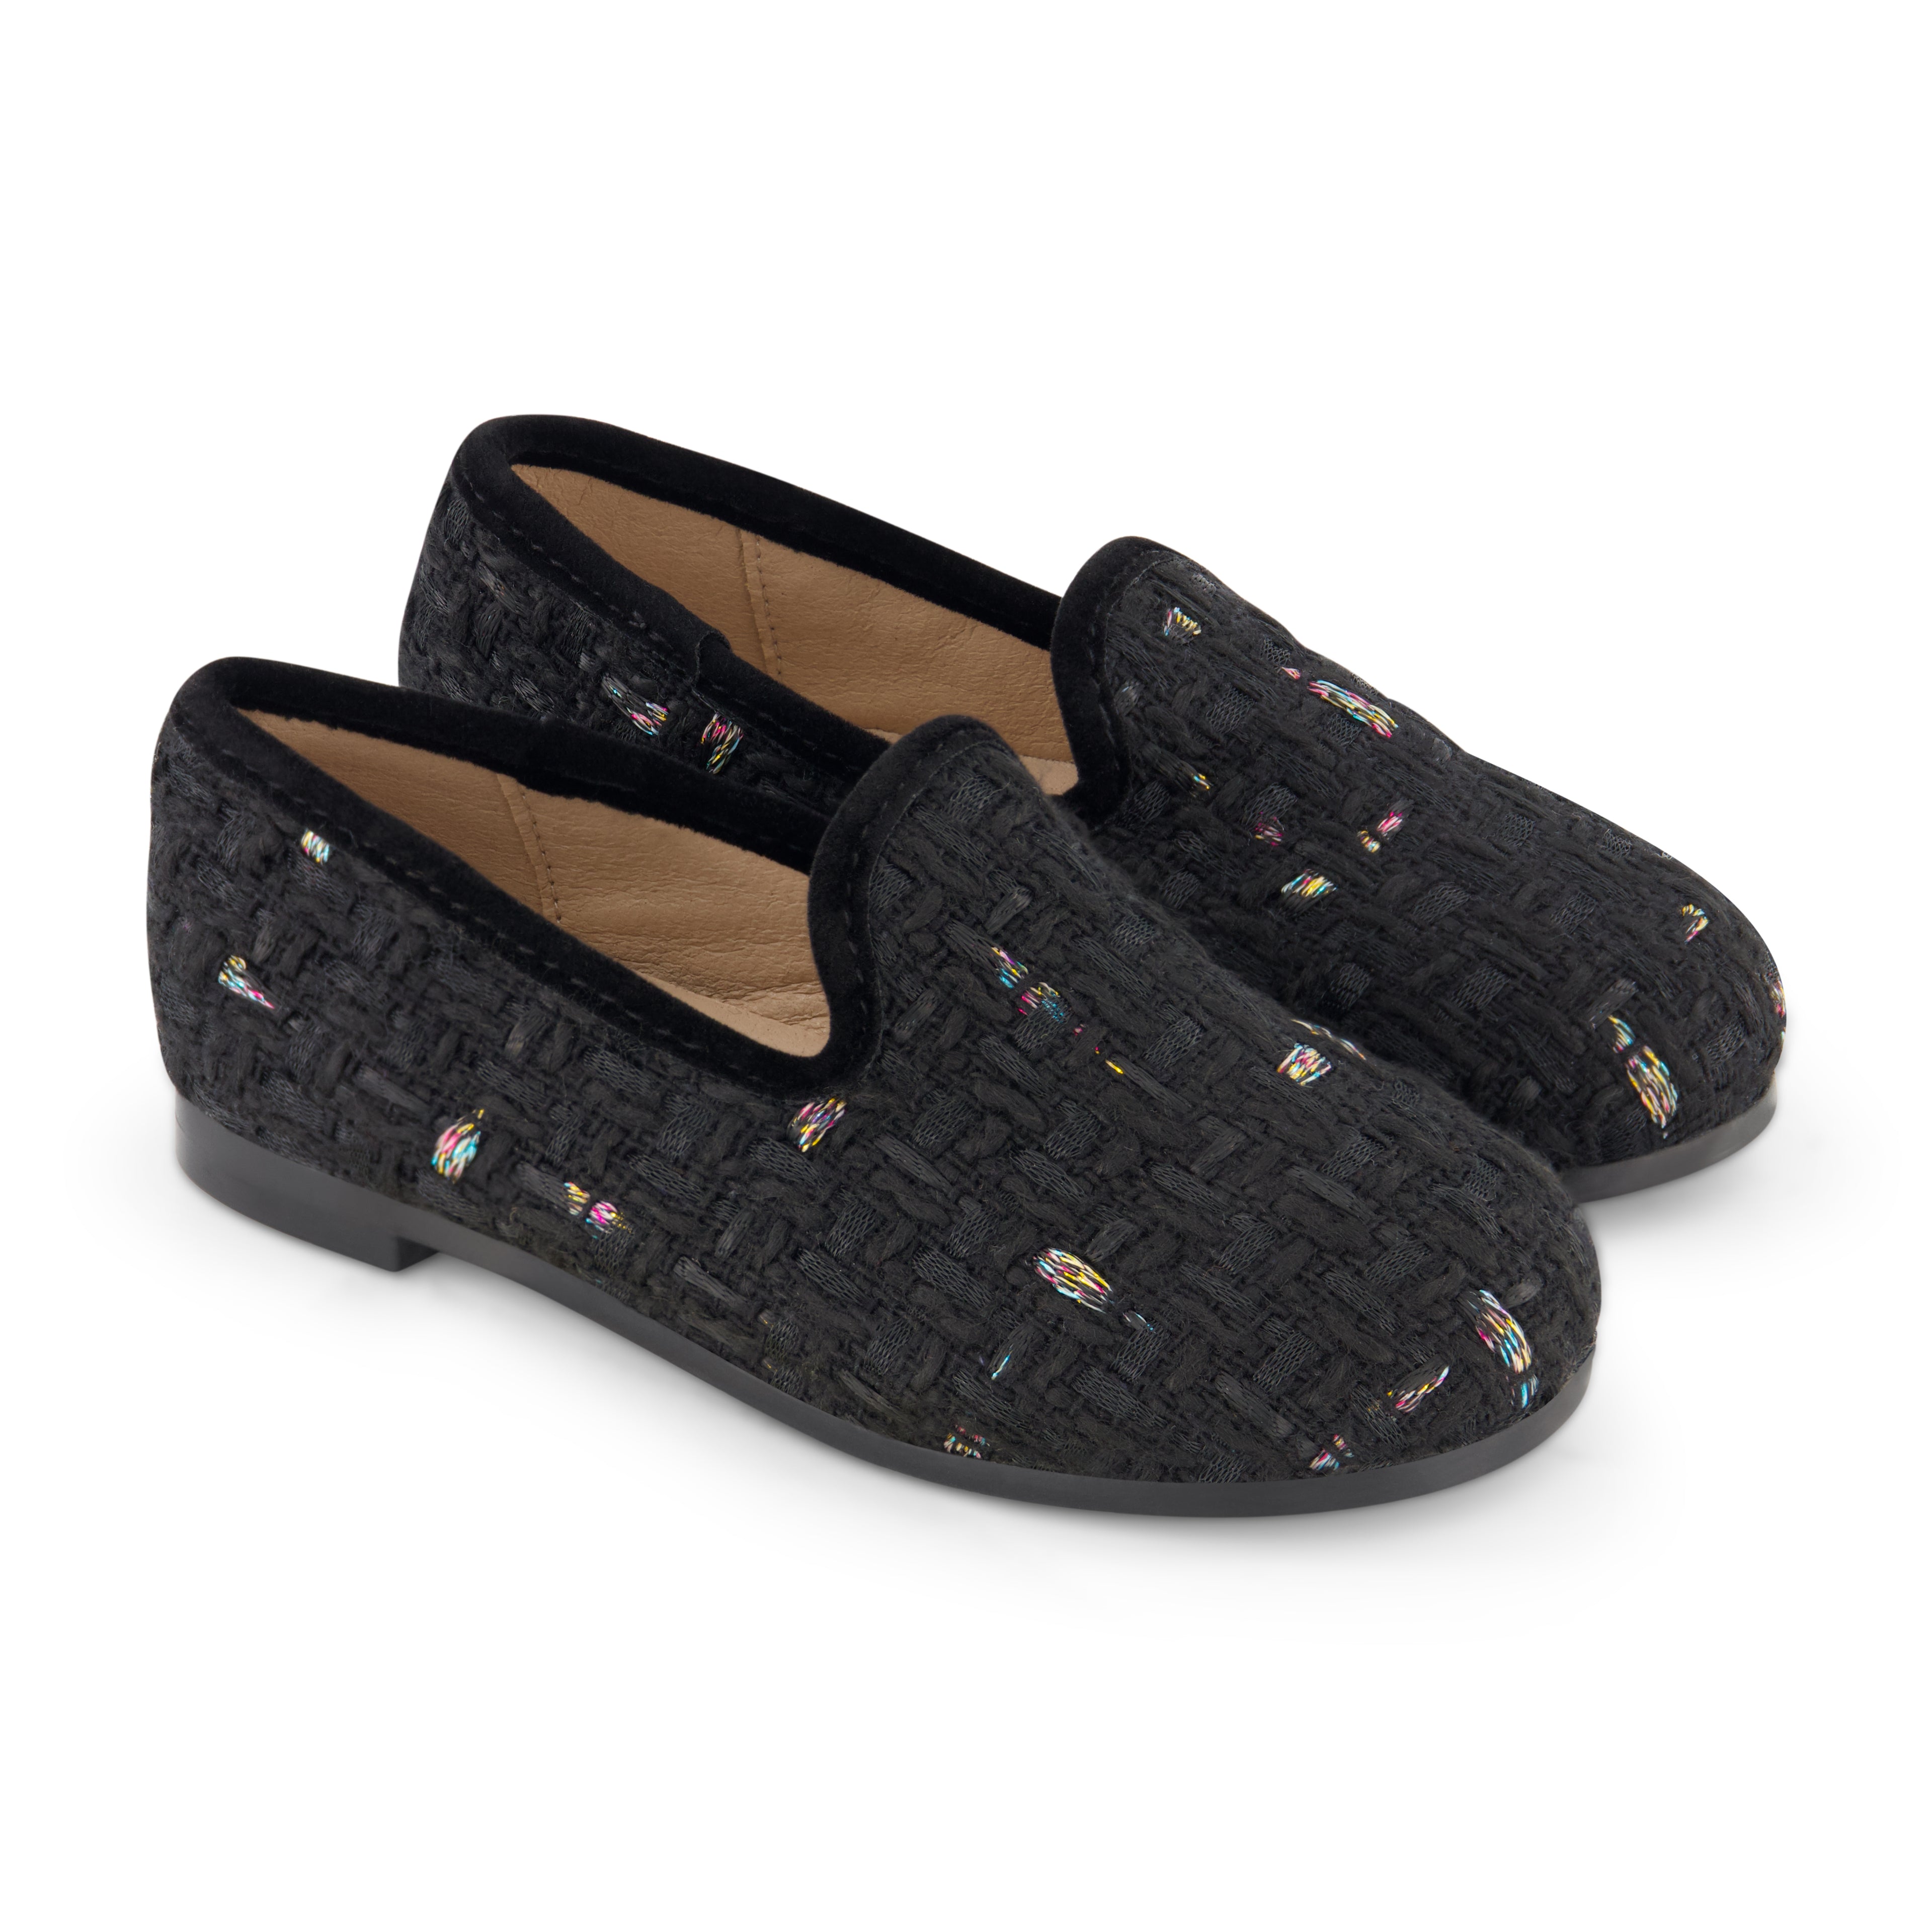 Woven Loafer - Hard Sole